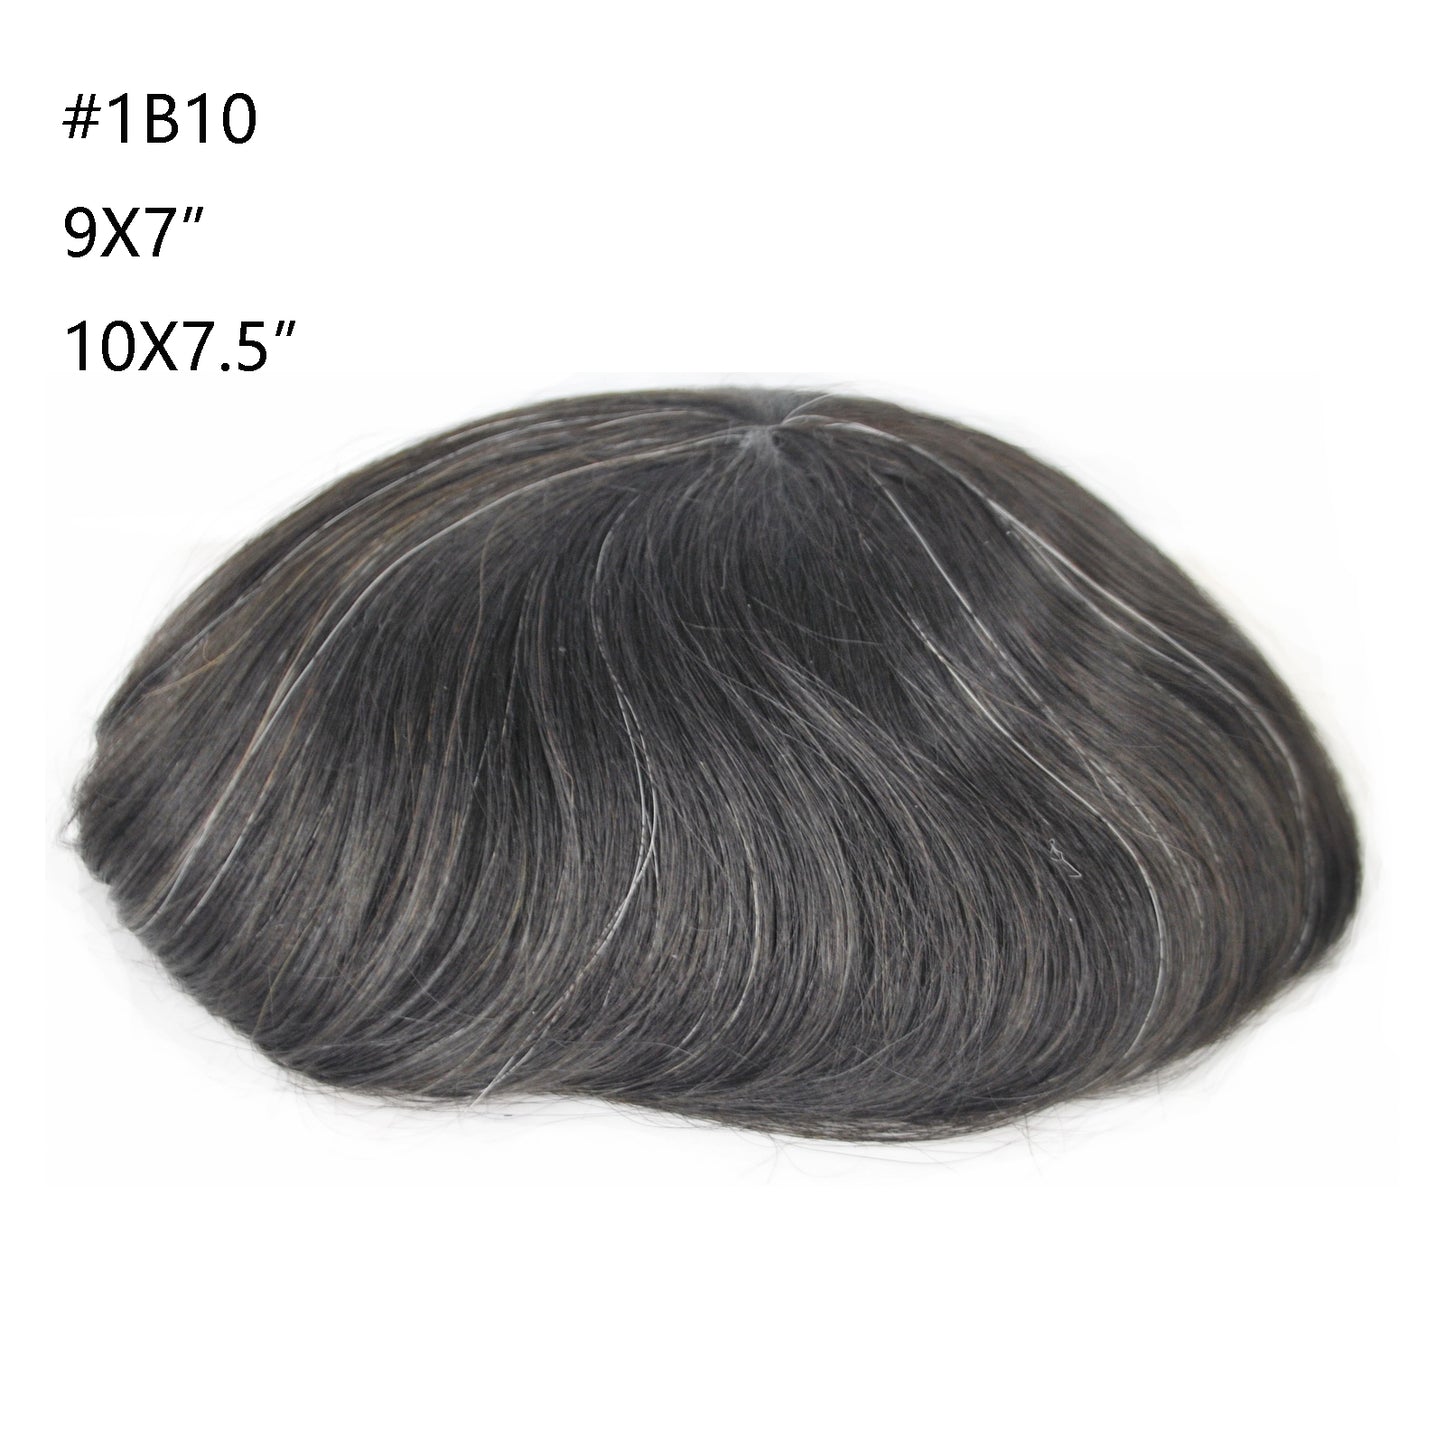 Full Swiss Lace hair system natural black color with 10% grey hair prosthesis for men